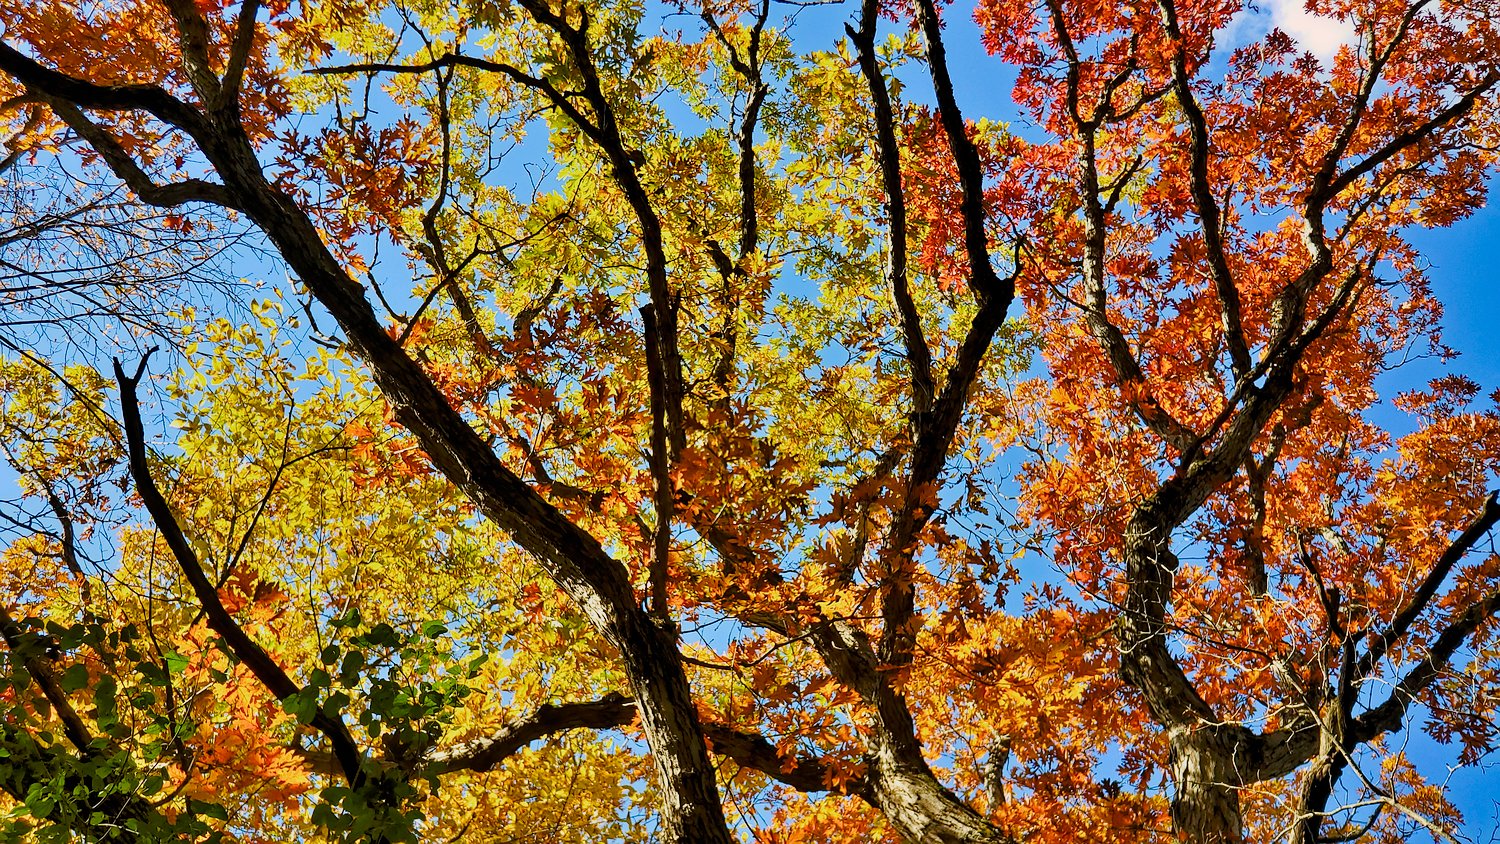 Yellow and orange leaves against the pale blue sky at Rush Creek Conservation Area.